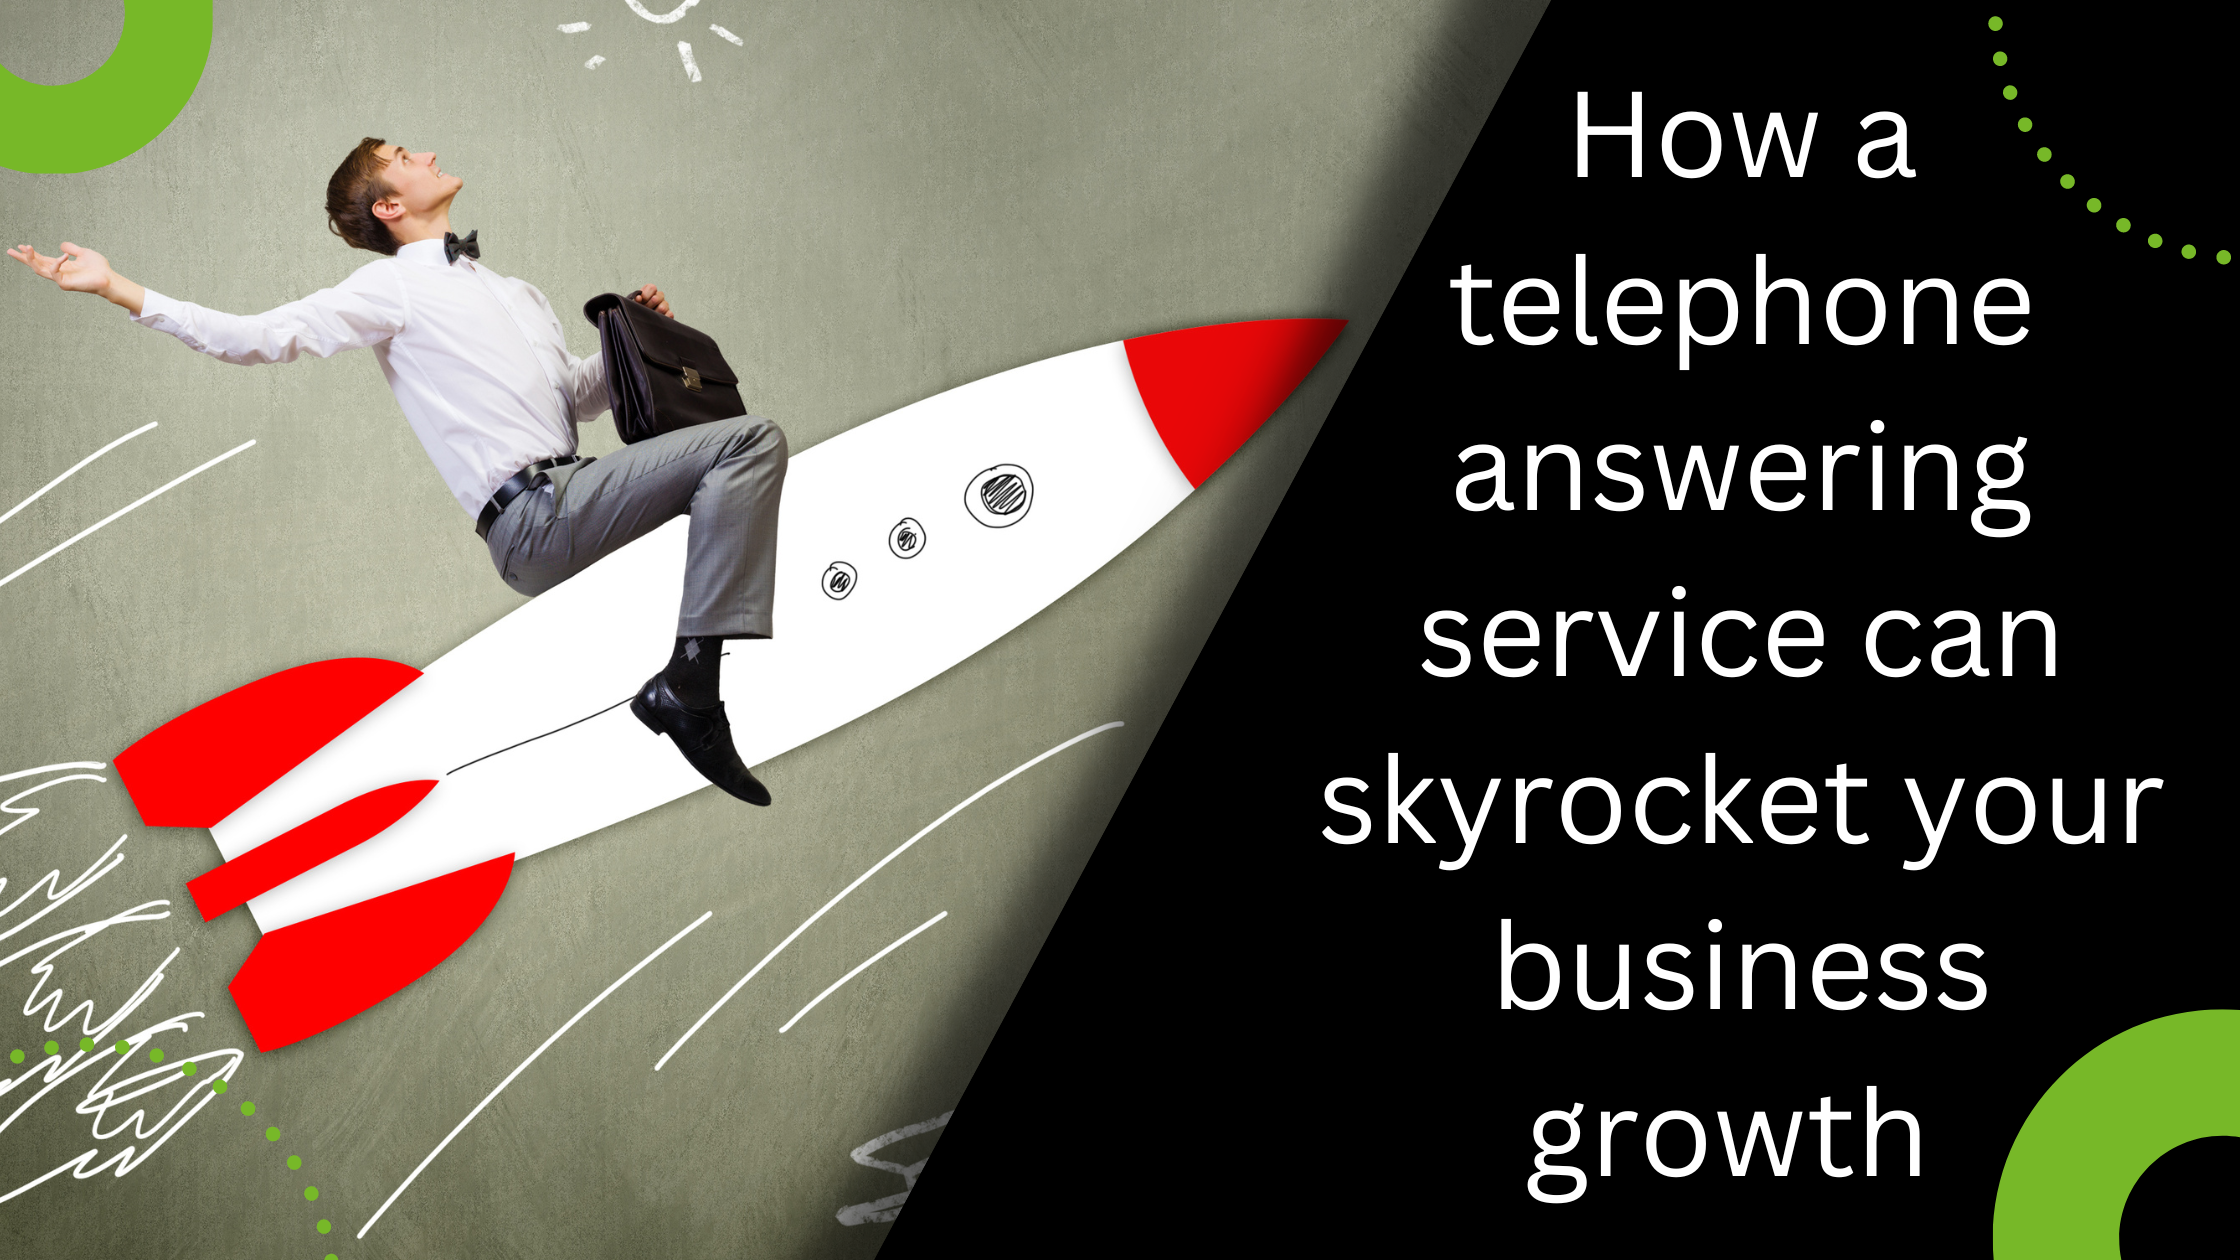 How a telephone answering service can skyrocket your business growth